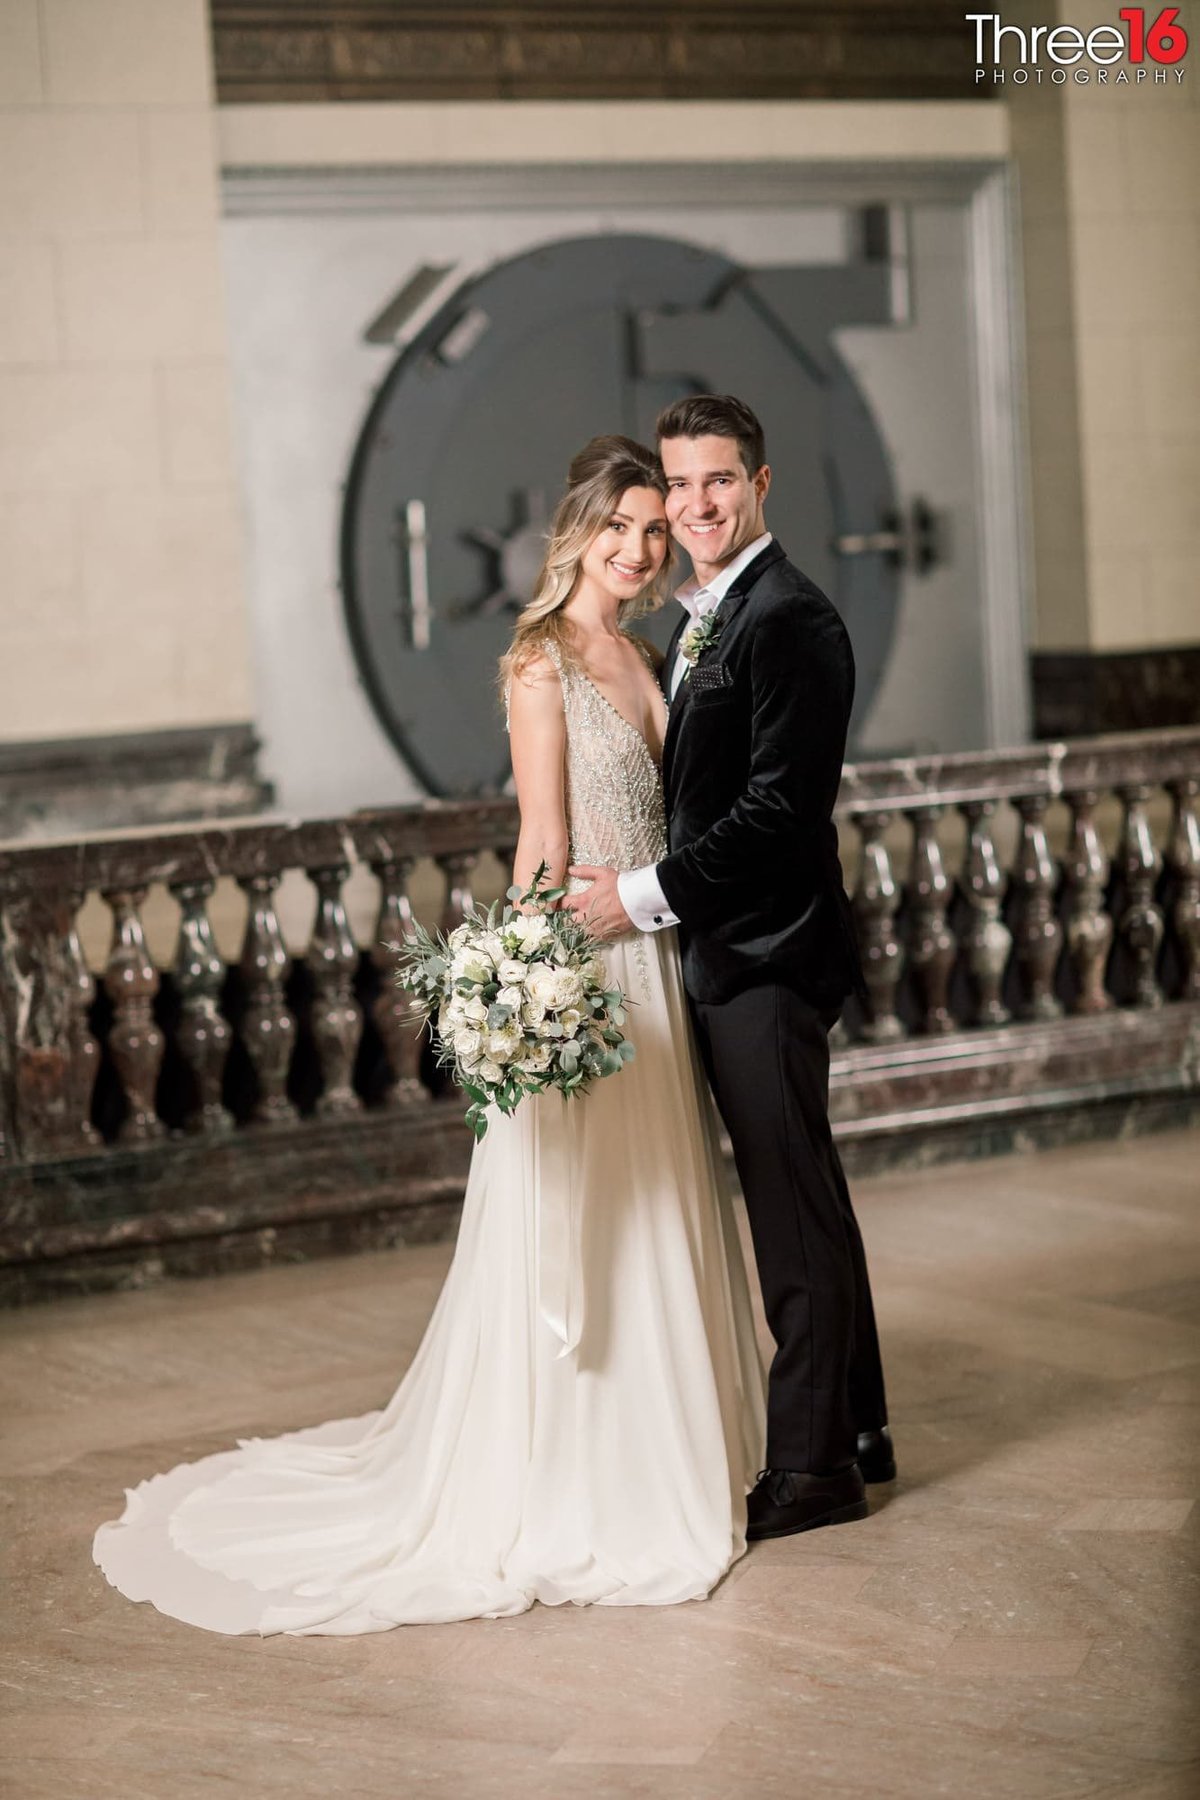 Bride and Groom pose in front of an old vintage vault